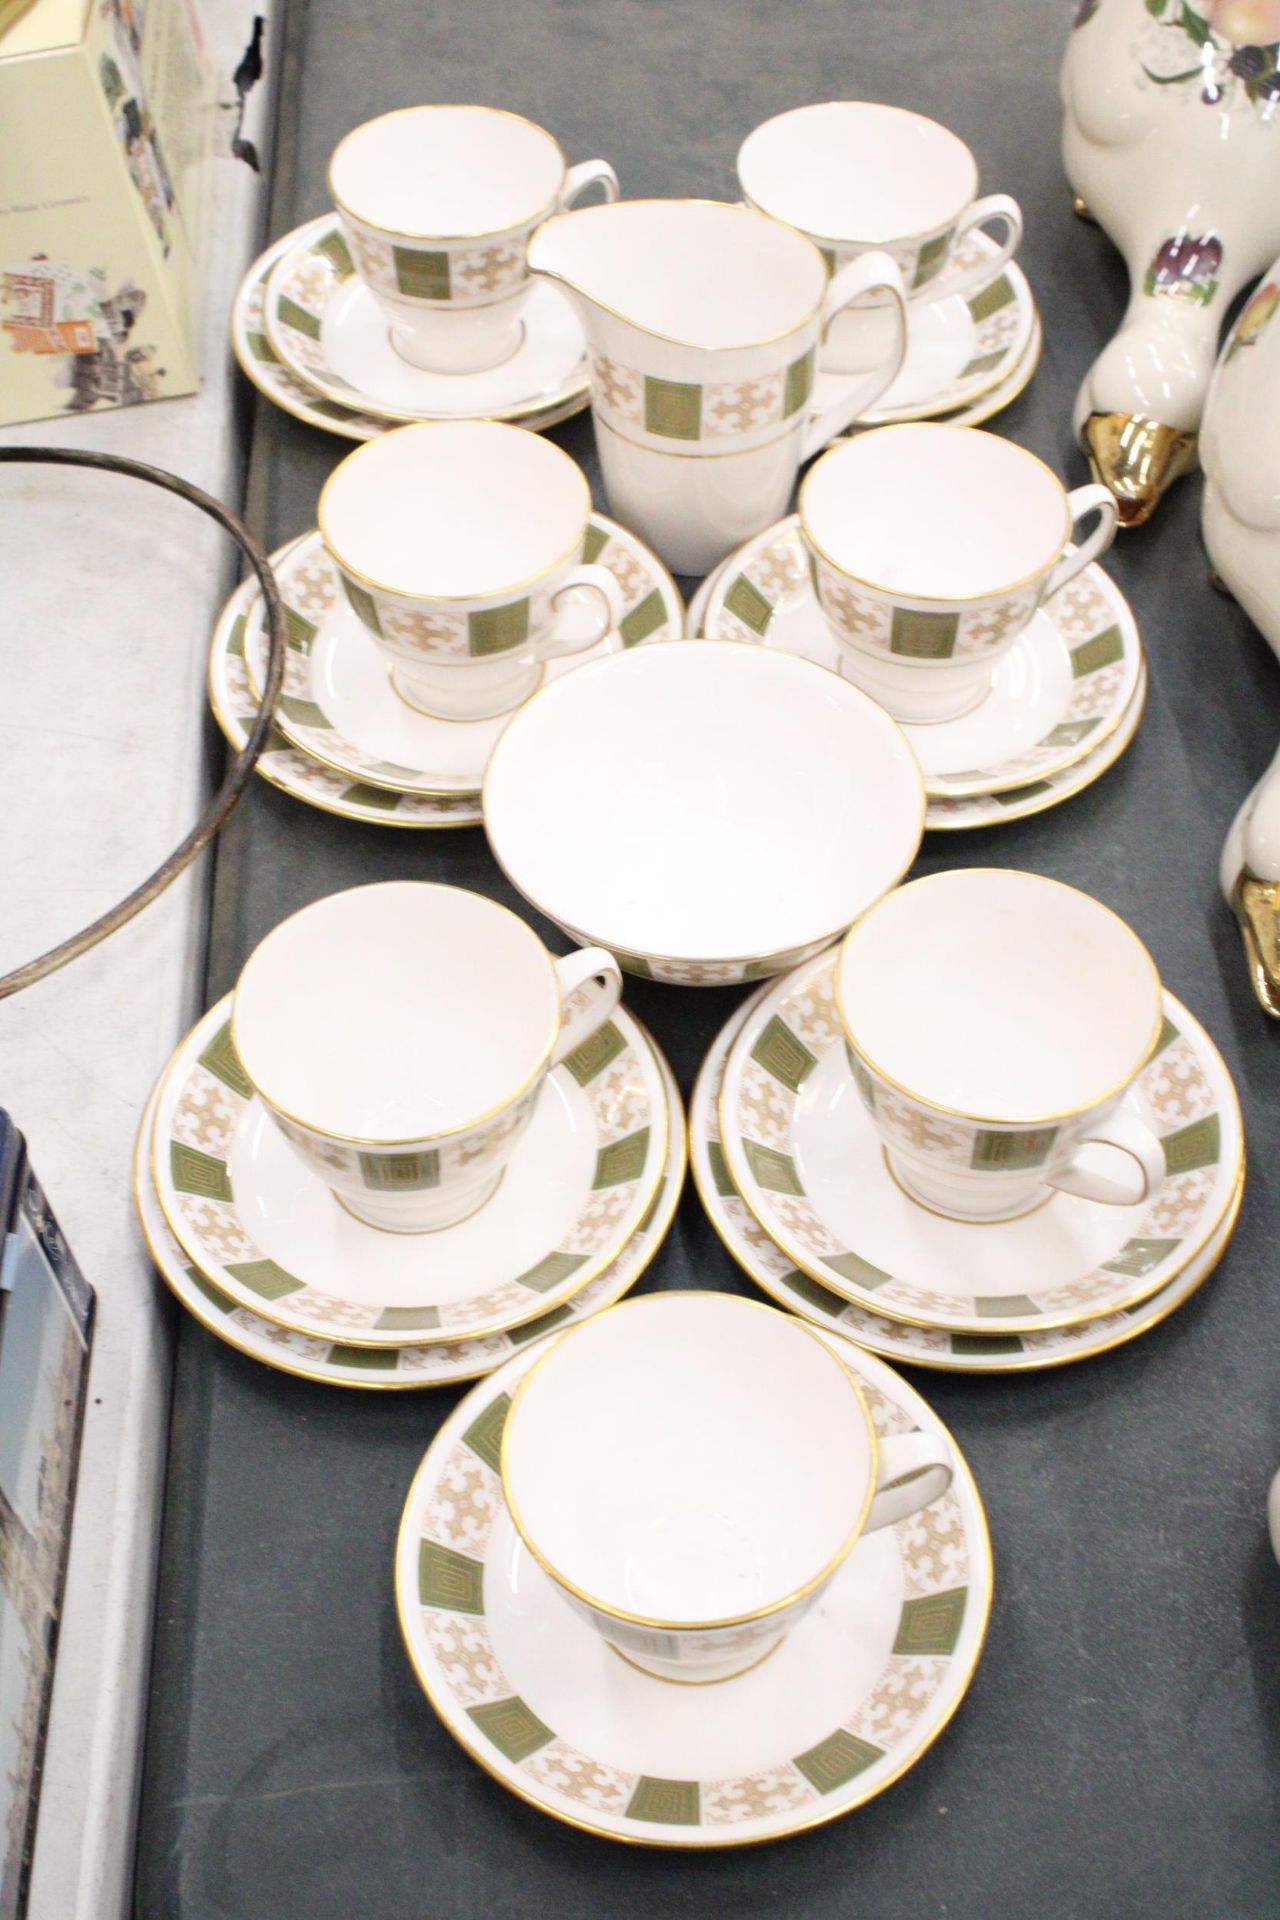 A VINTAGE SPODE, 'PERSIA' TEASET, TO INCLUDE, A CREAM JUG, SUGAR BOWL, CUPS, SAUCERS AND SIDE PLATES